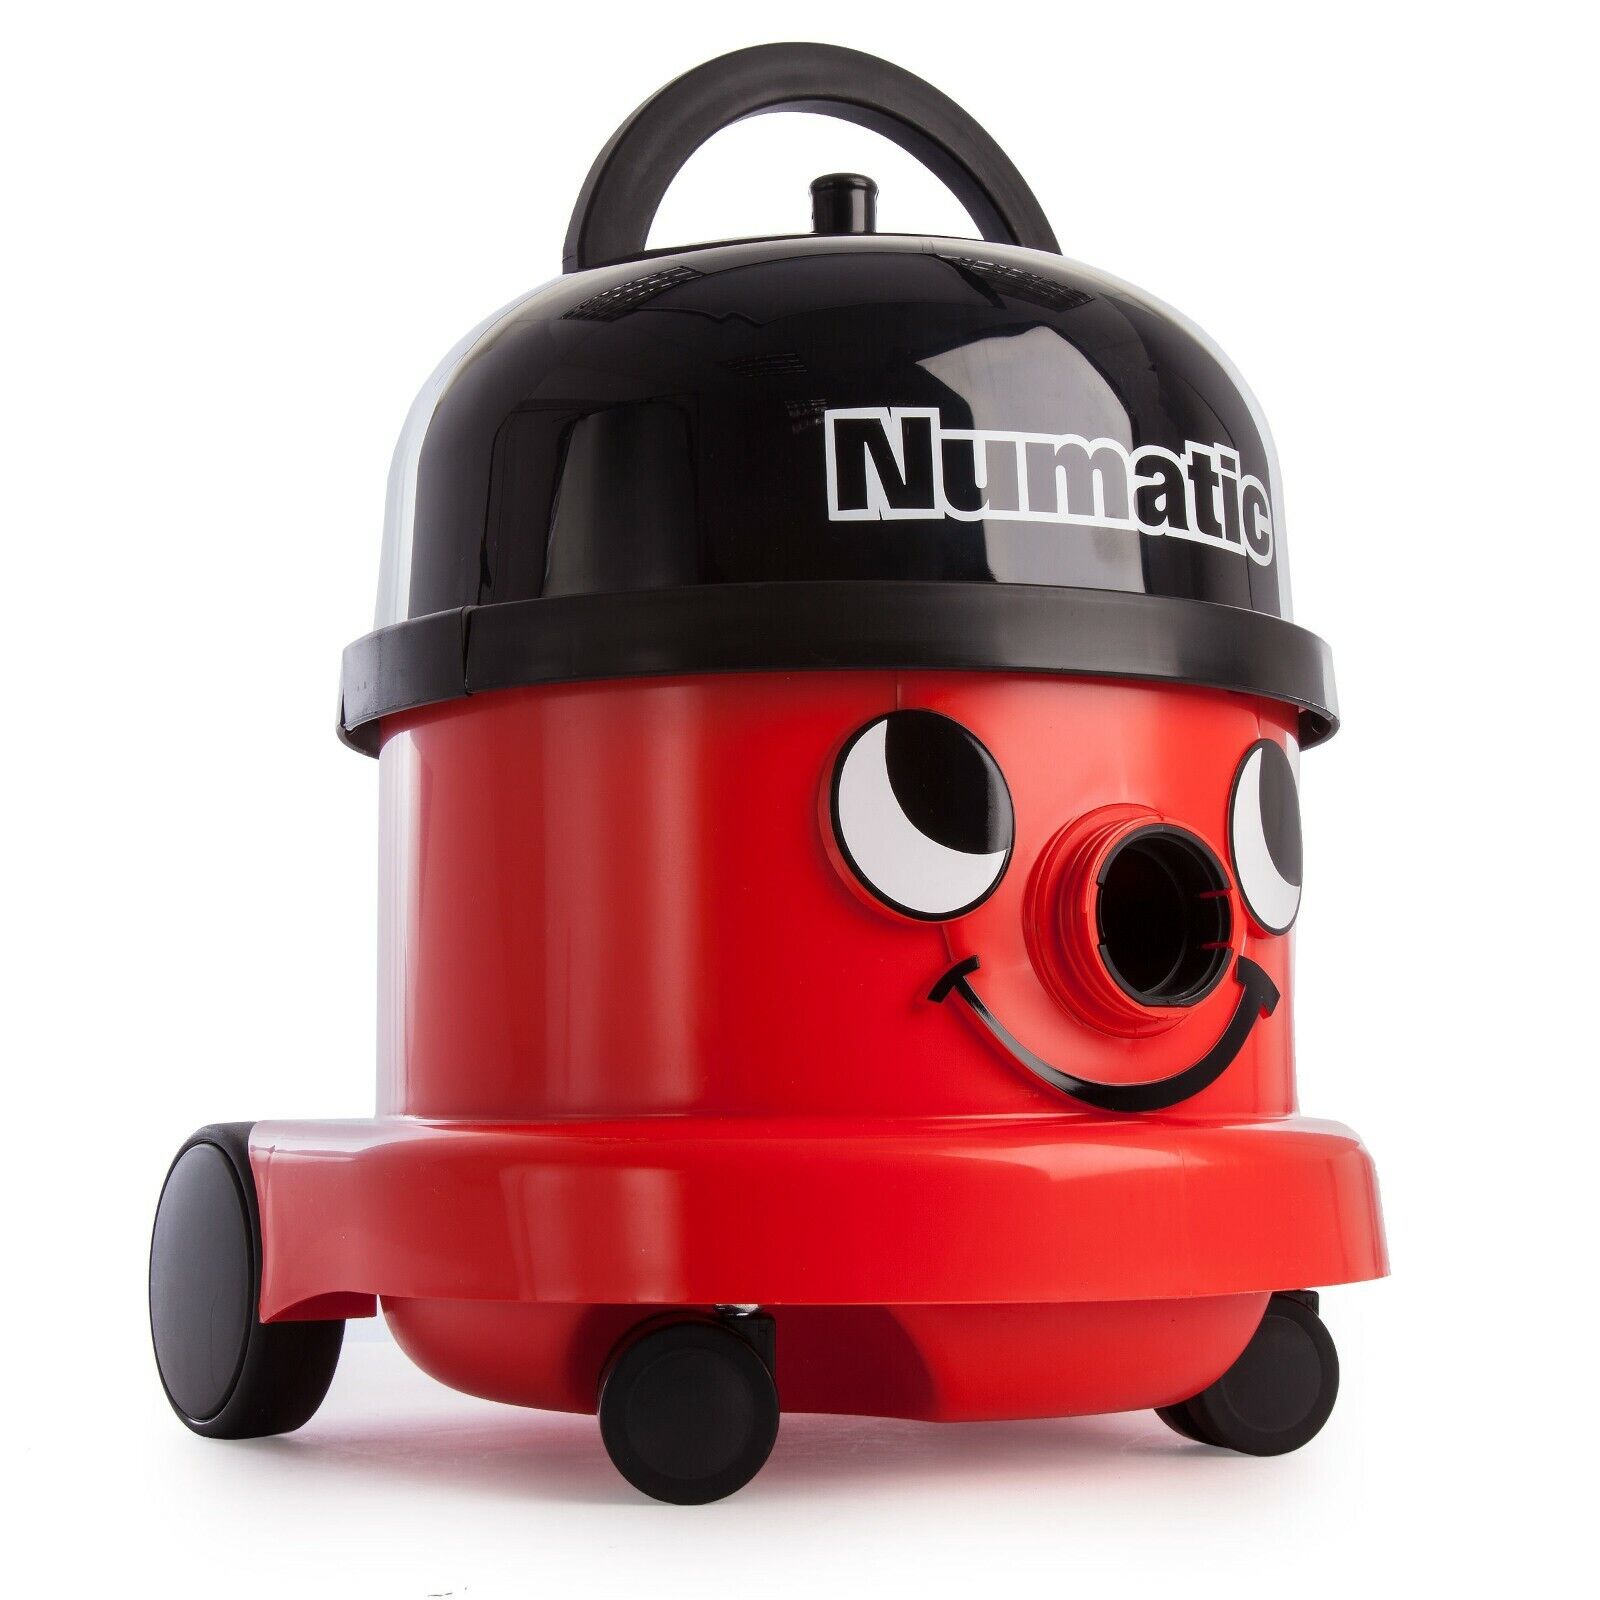 Numatic Henry Vacuum Cleaner NRV240 9Ltr 620W Red Red 9Ltr 620W 360 x 370 x  415mm NRV240 (Each)